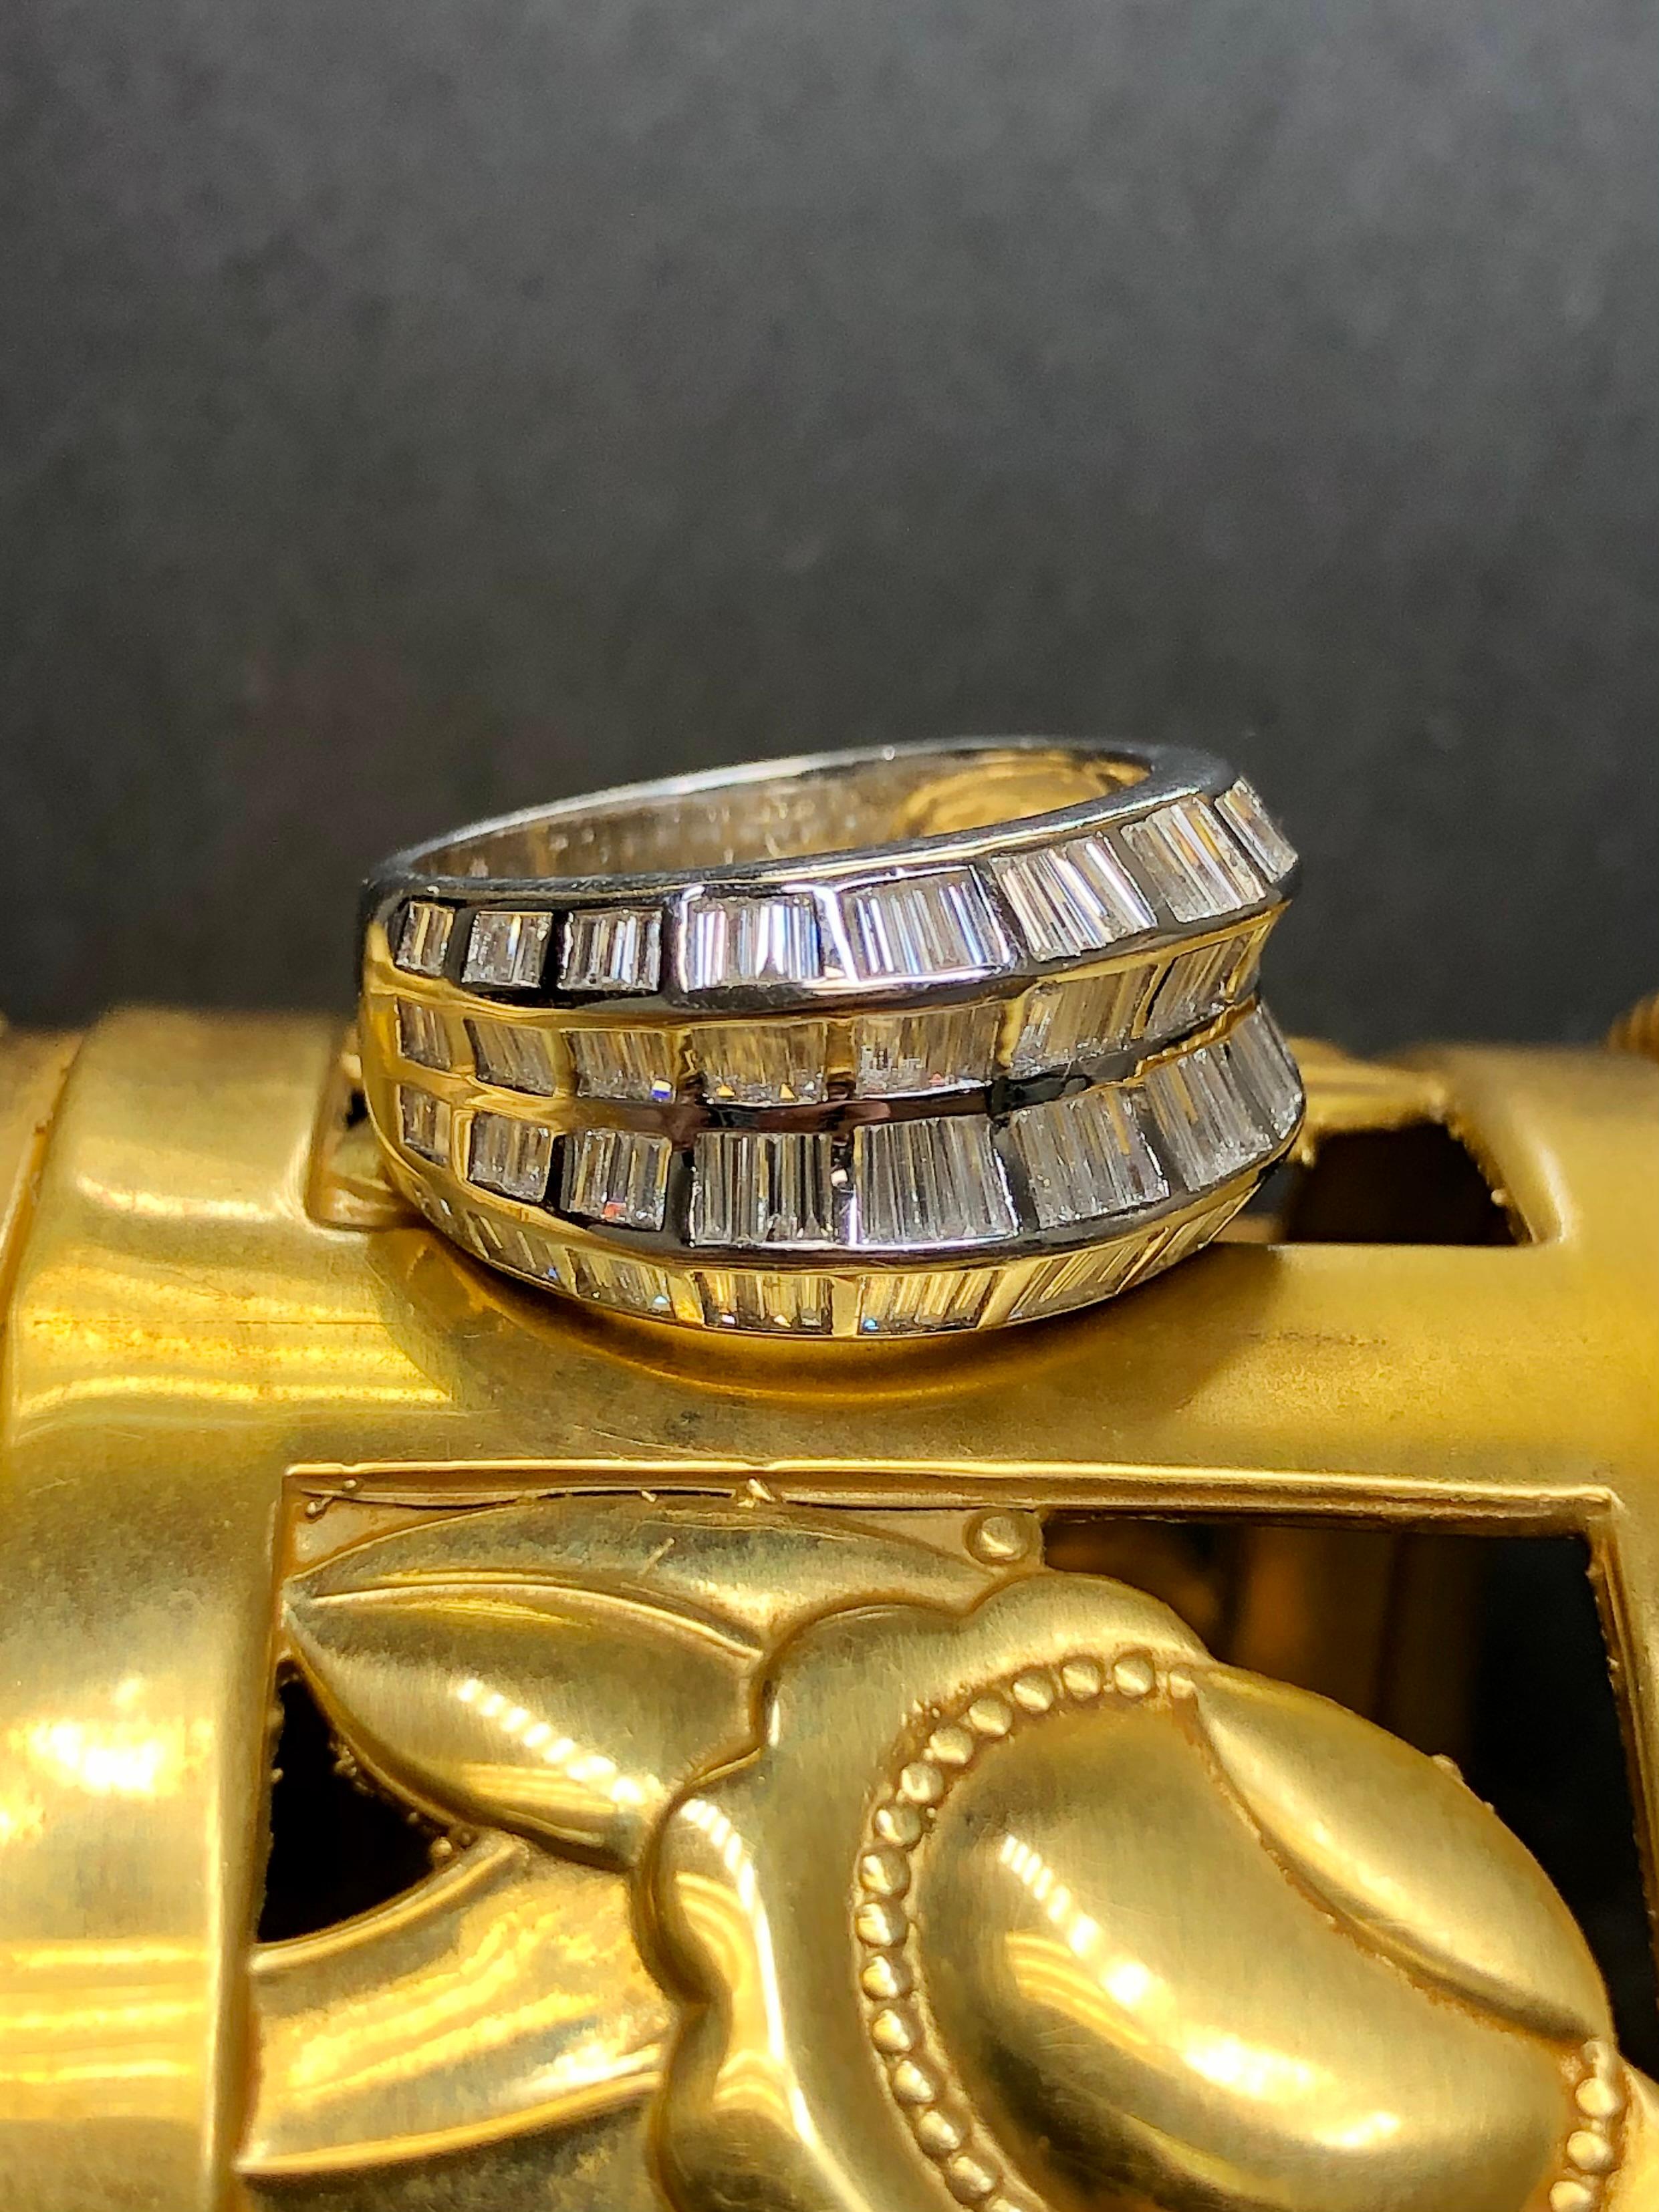 A contemporary ring done in 18K white gold channel set with approximately 4cttw I. G-I color Vs1-Si1 clarity baguette diamonds. Stones do graduate slightly towards the center. A modern but elegant look.


Dimensions/Weight:

Ring measures .45” wide